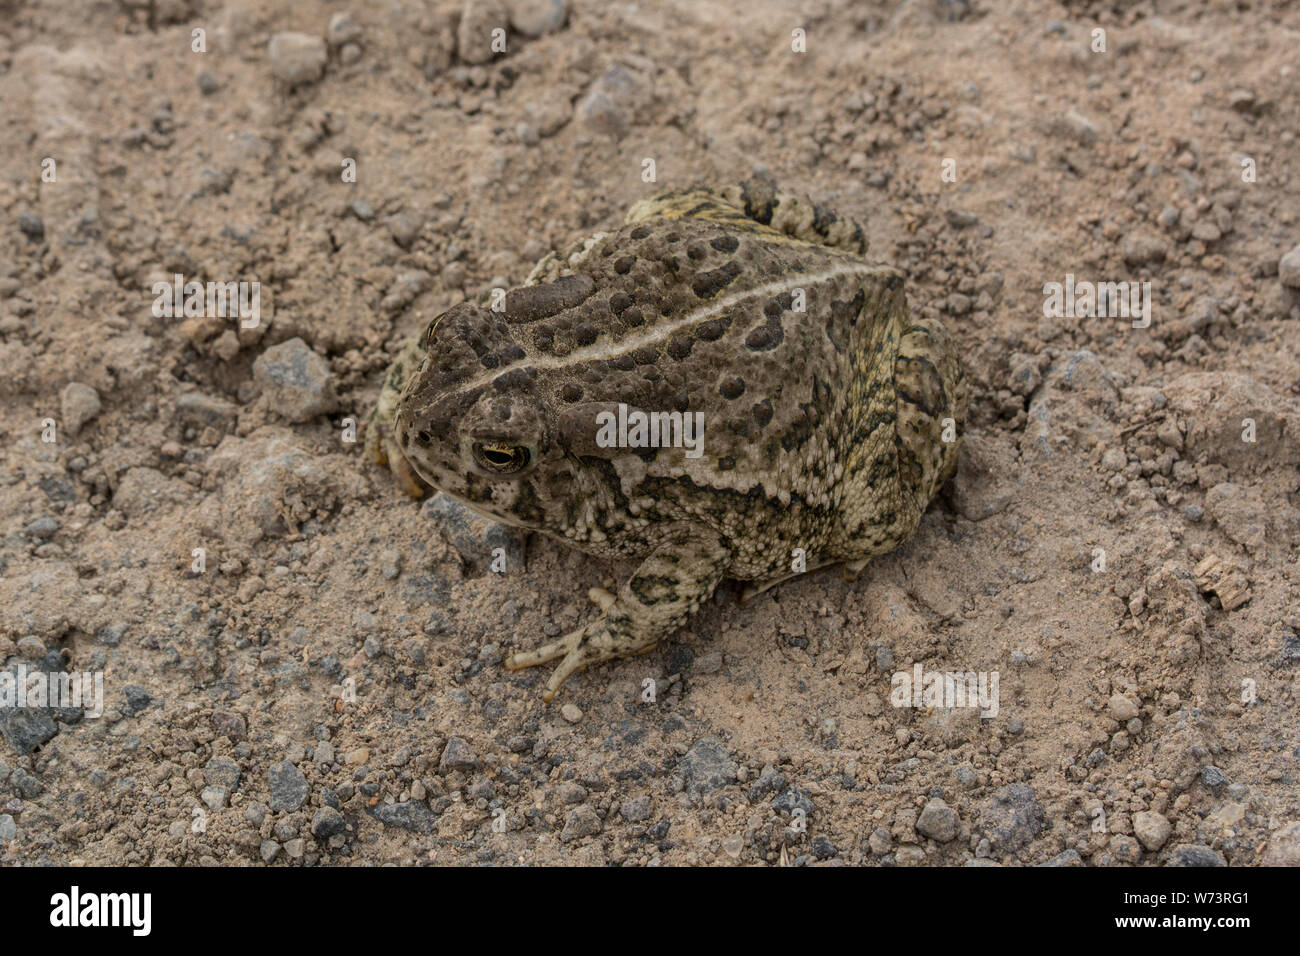 Rocky Mountain (Toad Anaxyrus woodhousii woodhousii) de Delta County, Colorado, USA. Banque D'Images